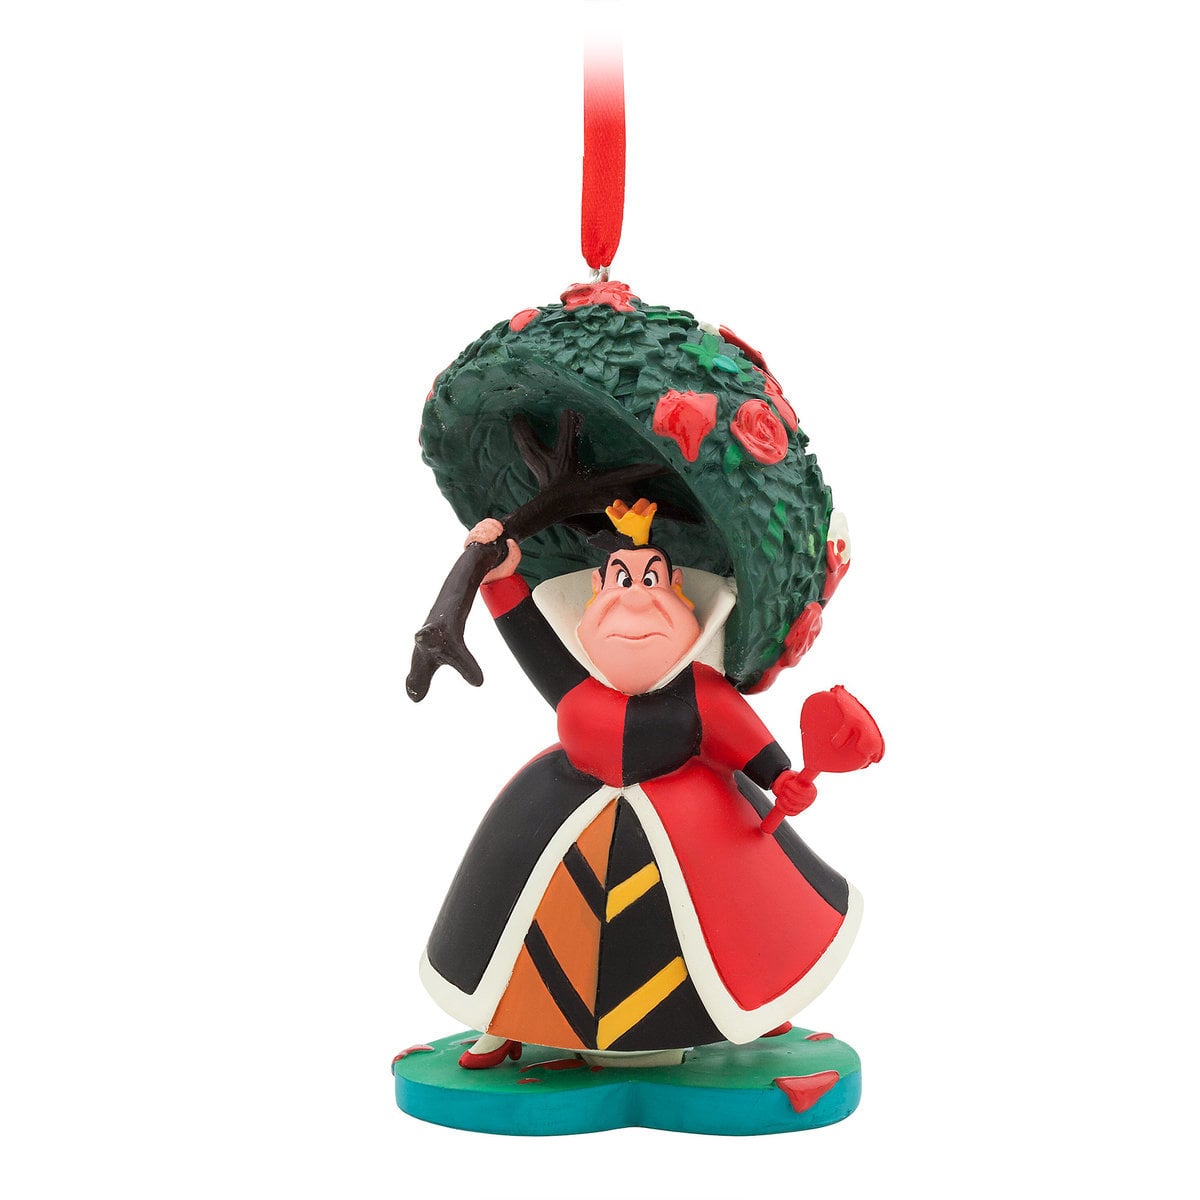 Doorknob From Alice in Wonderland Sketchbook Ornament, Ho Ho Hold Up!  Disney Just Dropped Its 2019 Holiday Ornament Collection